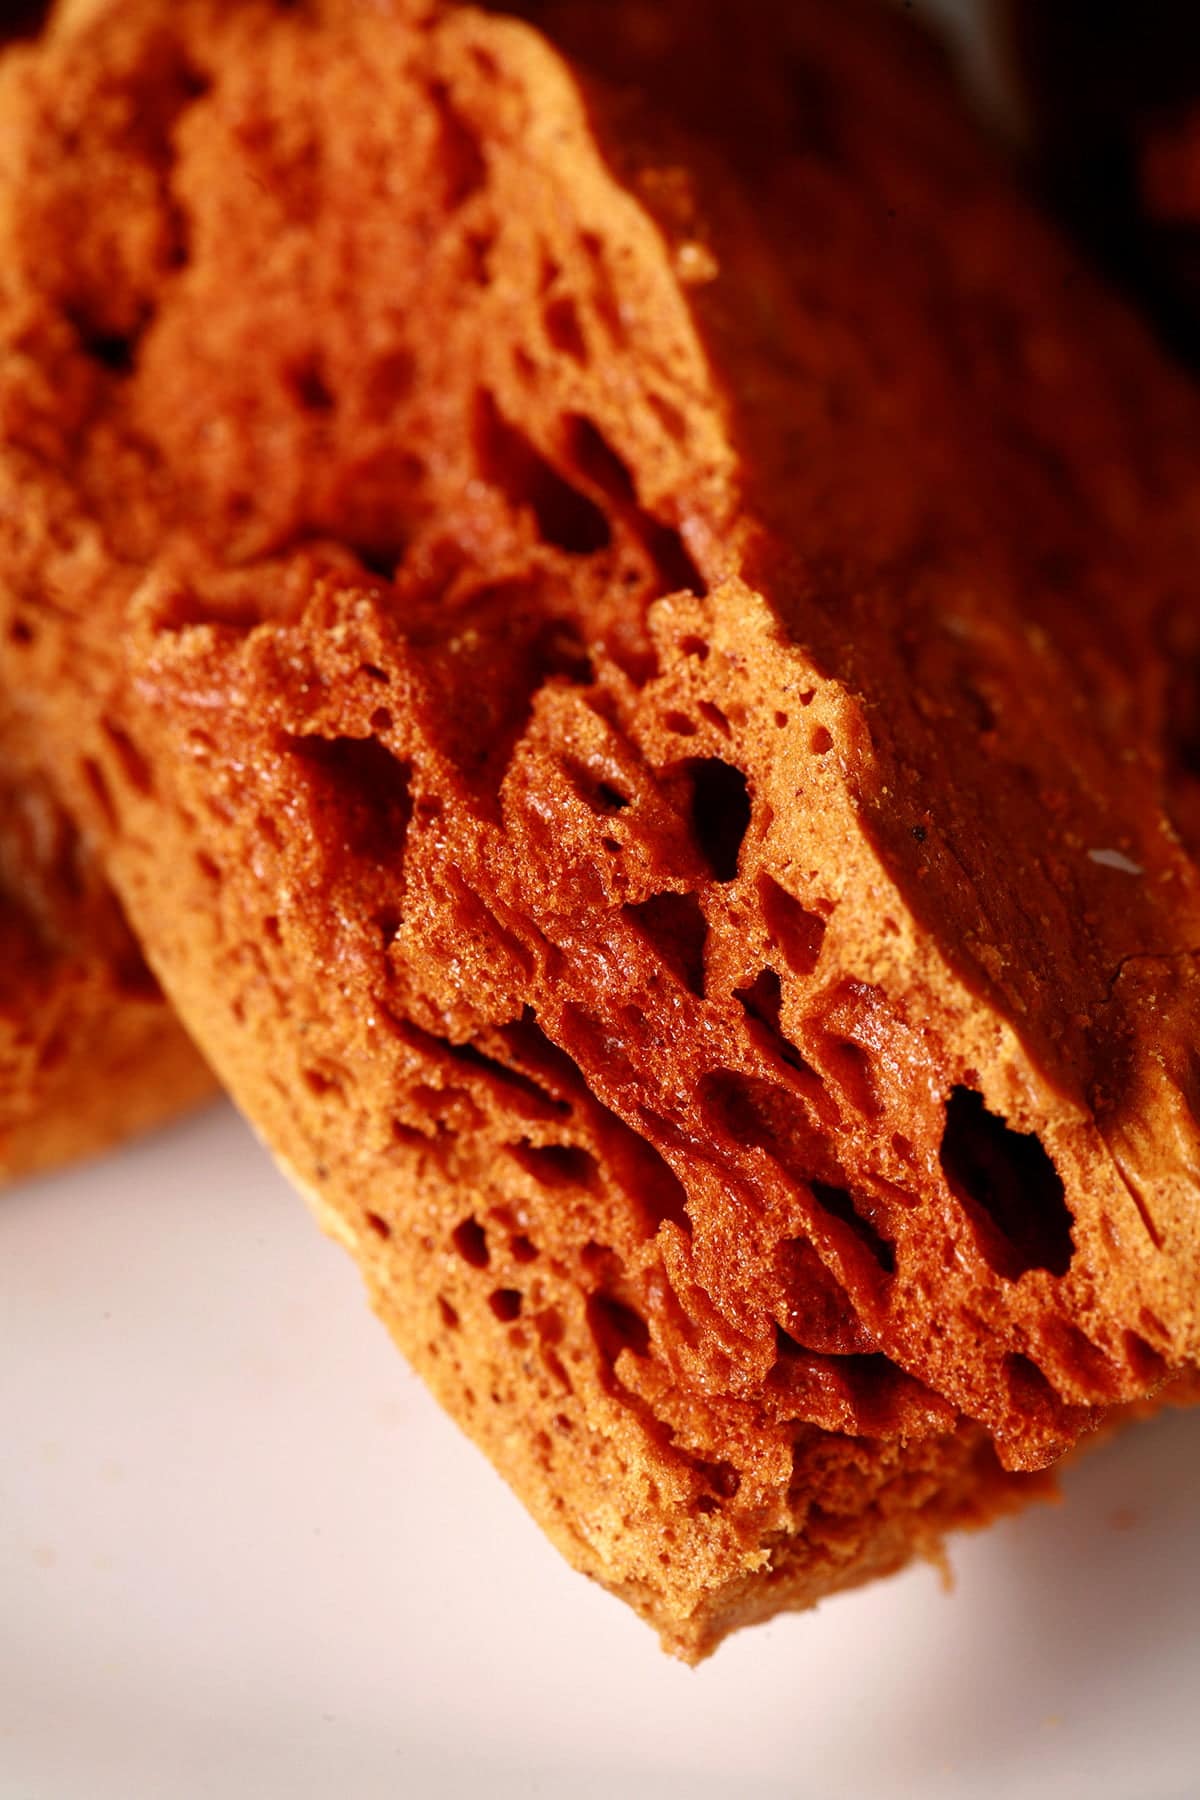 Chunks of deep amber coloured ginger-molasses sponge toffee are piled on a small white plate.